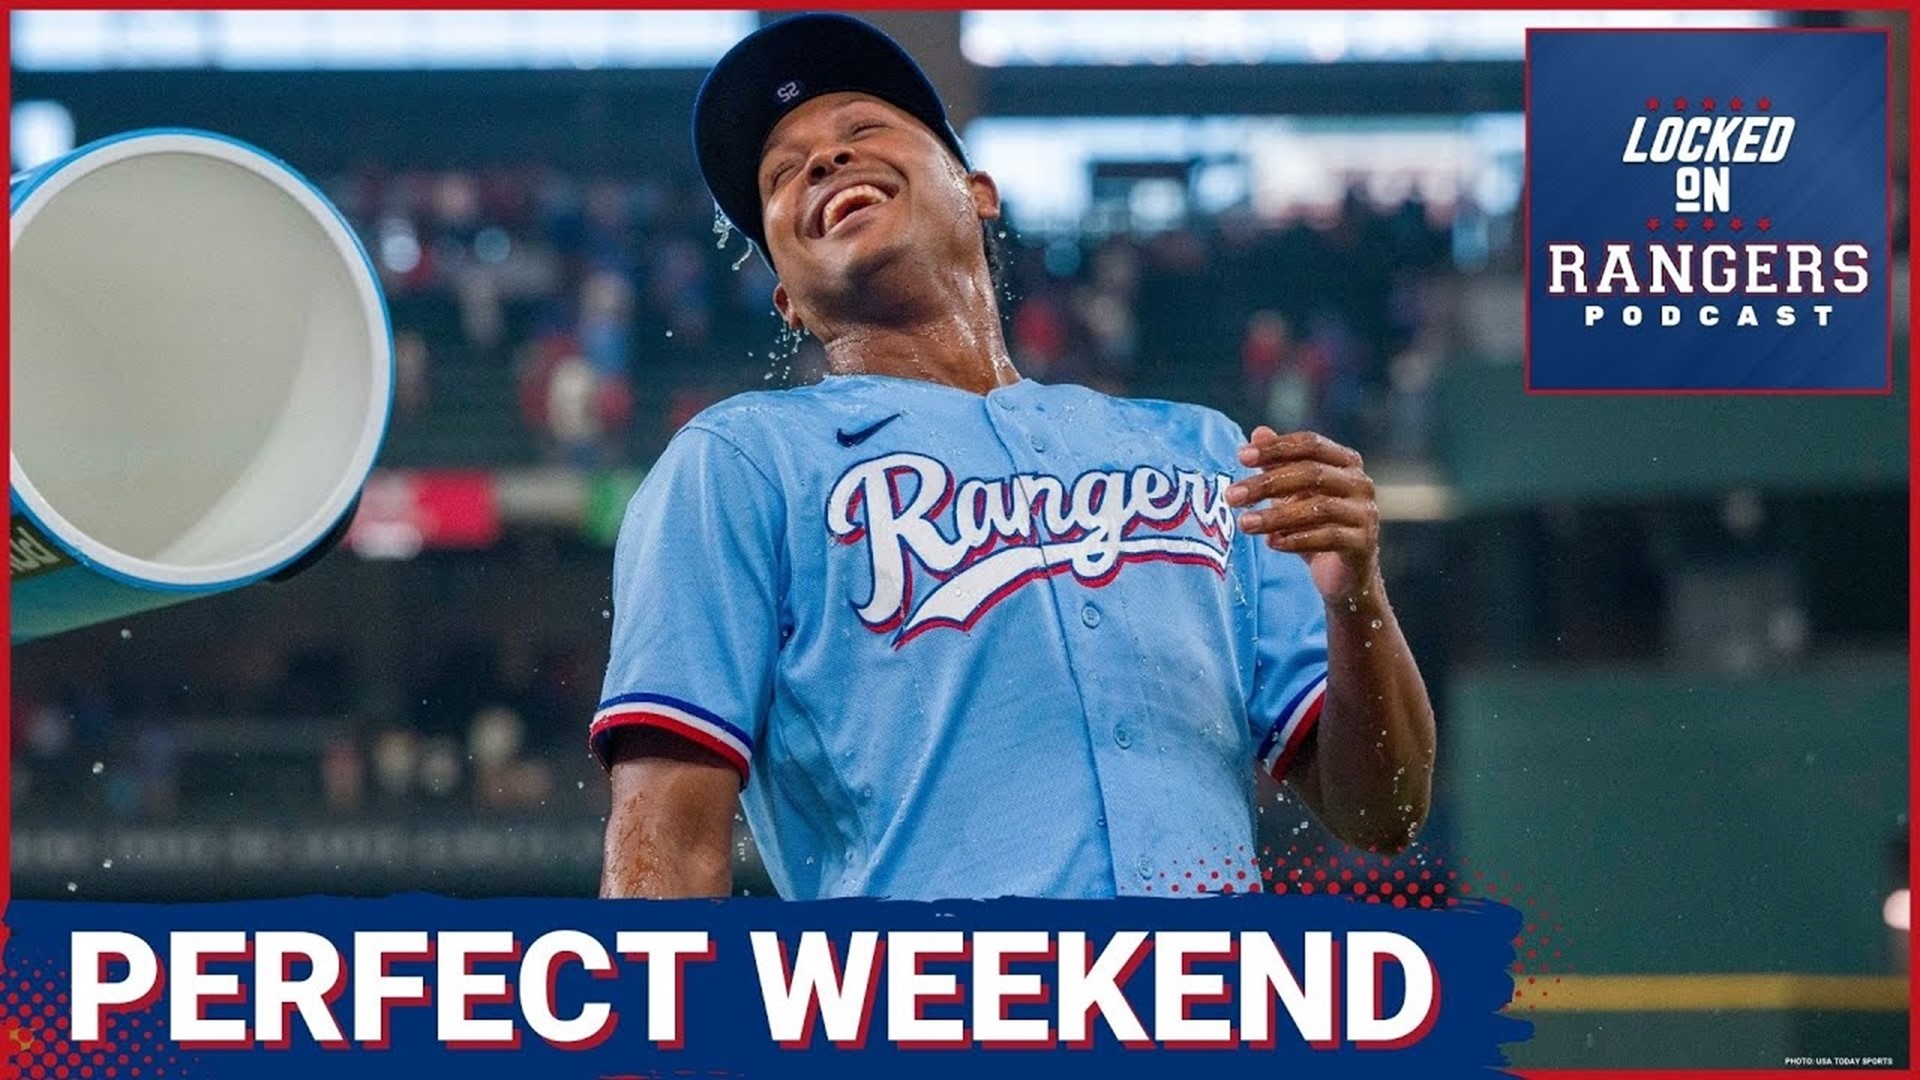 The Texas Rangers swept the Seattle Mariners to take a 2.5 game lead in the AL West as the Houston Astros got swept by the Kansas City Royals.